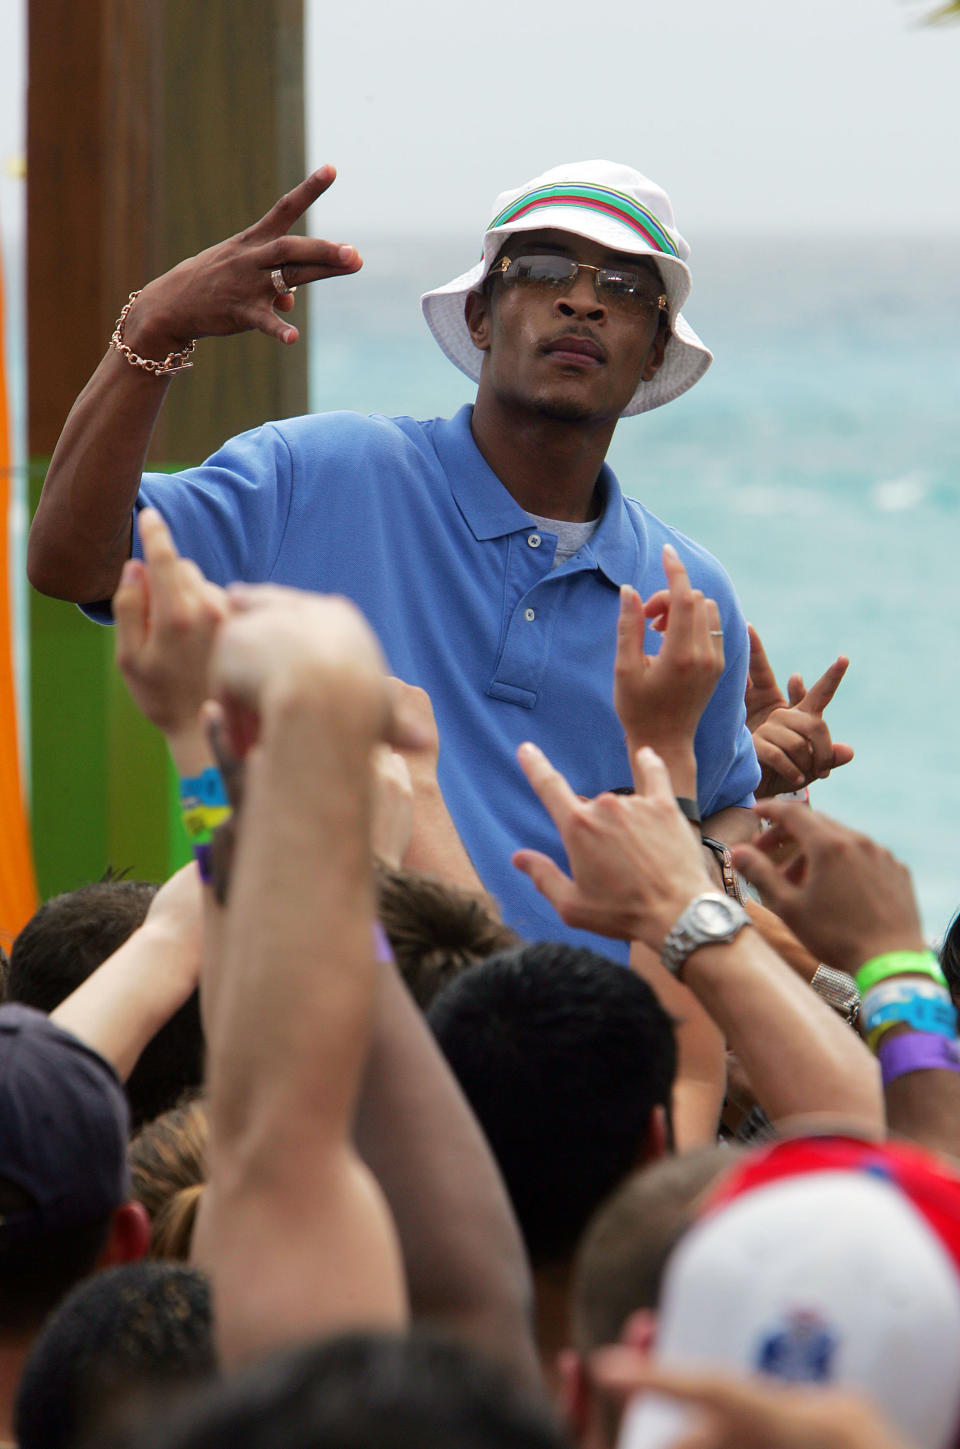 CANCUN, MEXICO - MARCH 9:   (U.S. TABS OUT) Rapper T.I. performs onstage during a taping for MTV Spring Break on the beach at The City nightclub March 9, 2005 in Cancun, Mexico. (Photo by Scott Gries/Getty Images)